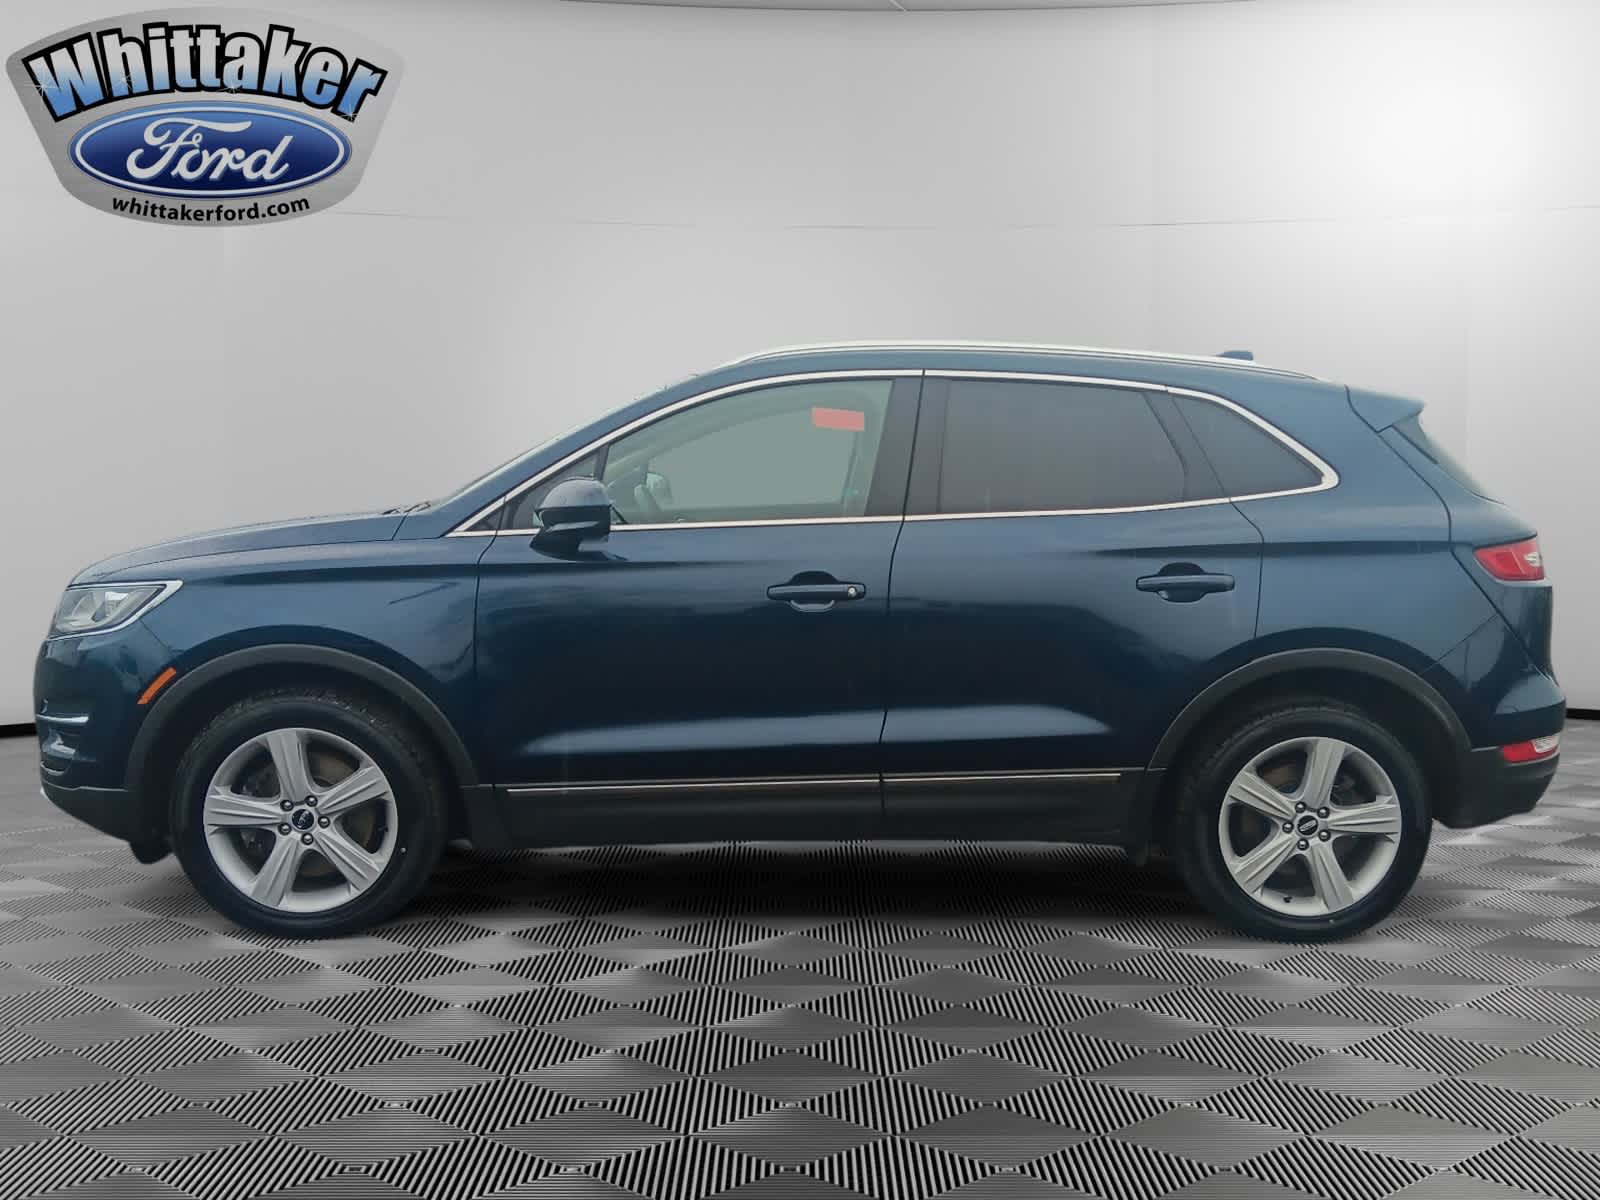 Used 2017 Lincoln MKC Premiere with VIN 5LMCJ1D91HUL23883 for sale in Williamson, NY